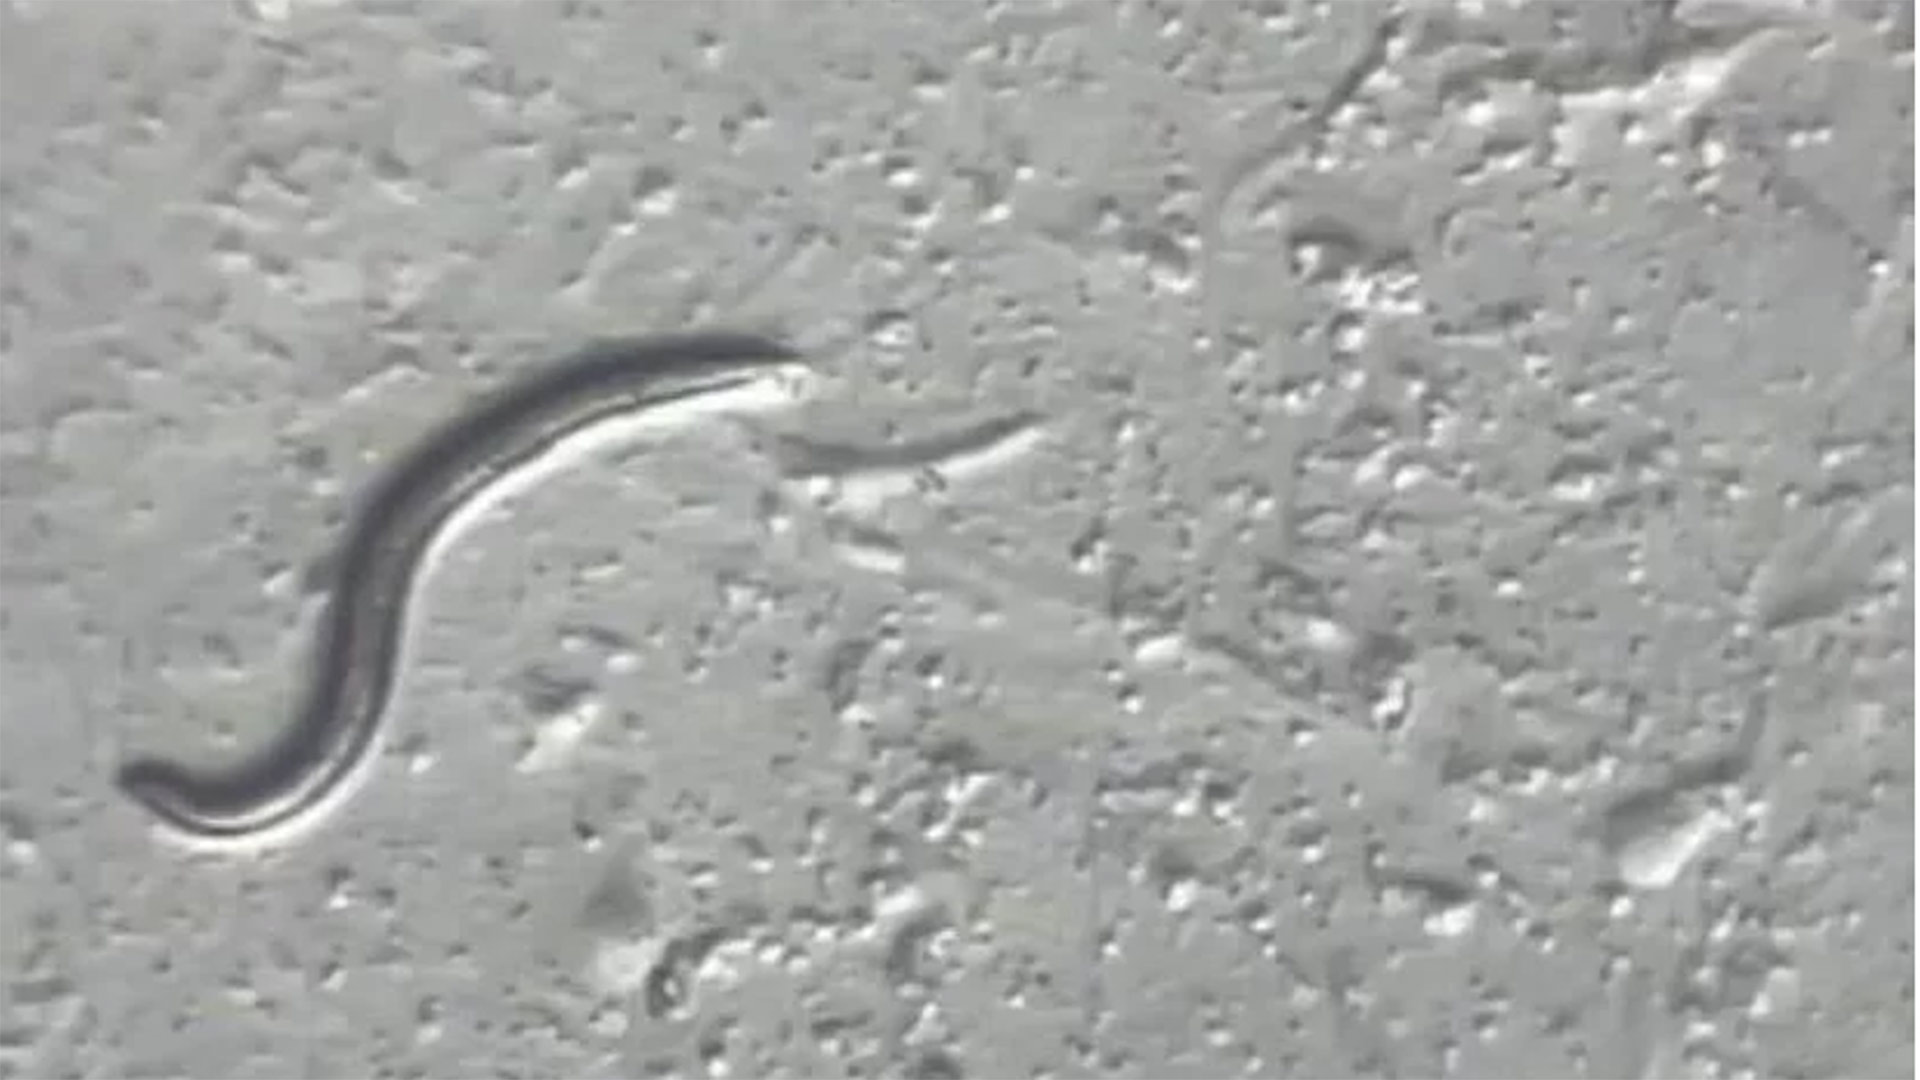 A Panagrolaimus kolymaensis nematode is seen under the microscope at the University of Cologne's worm lab in Germany.